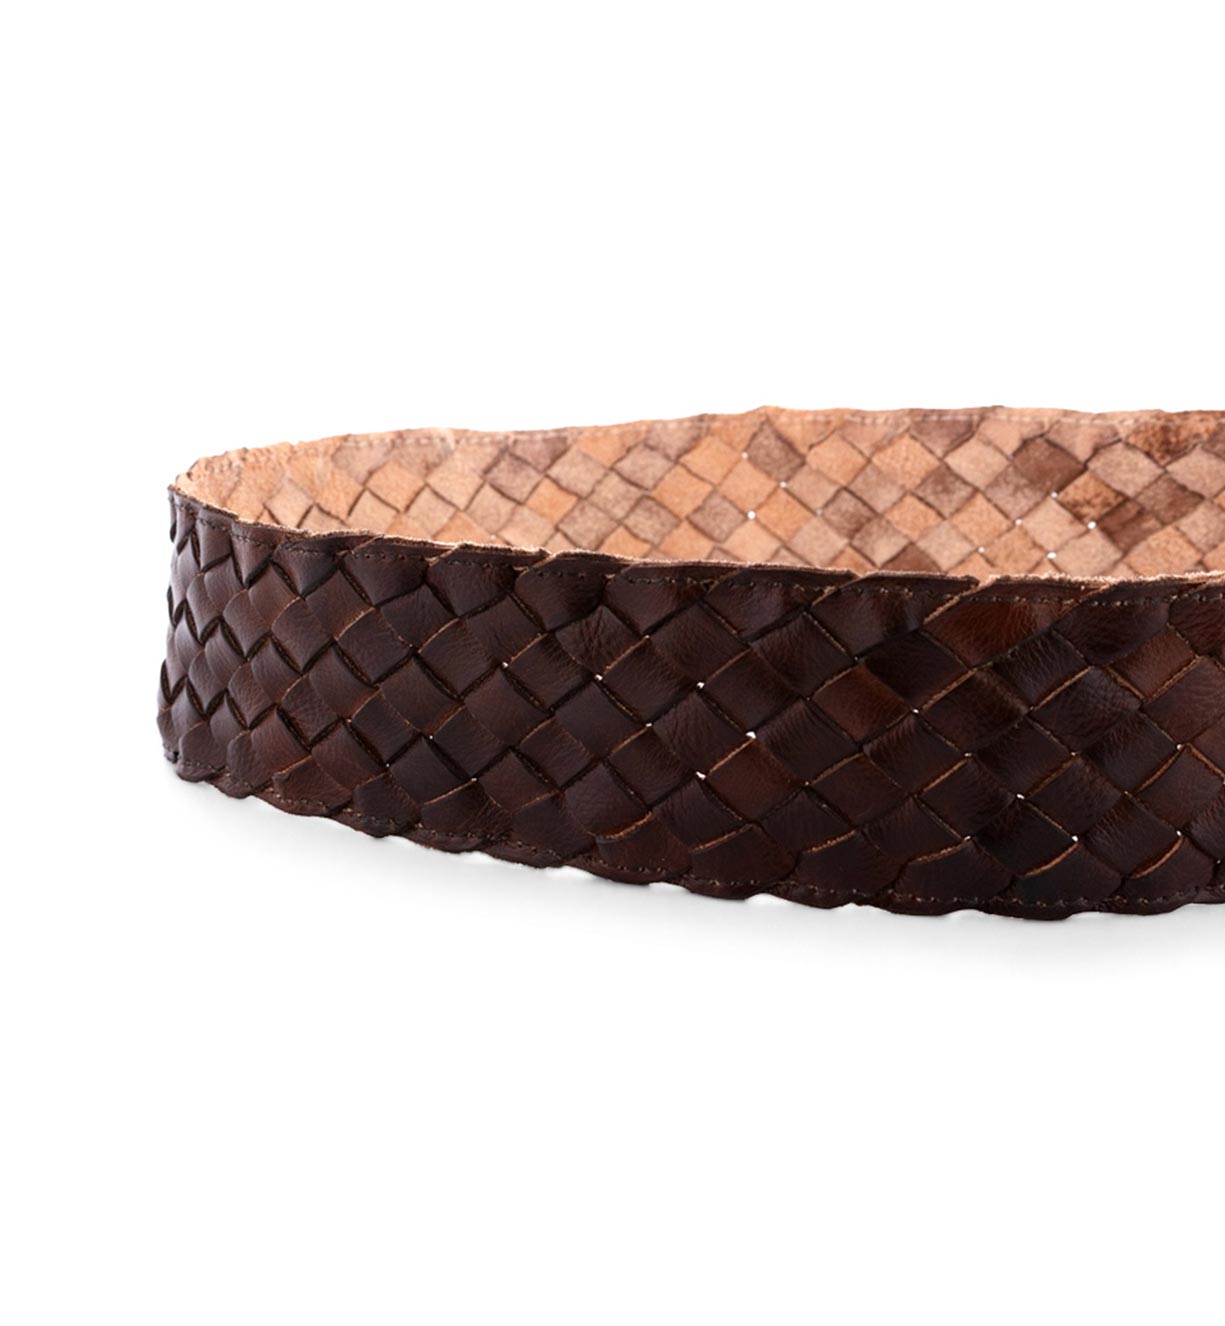 A brown leather Dreamweaver belt with a woven pattern by Bed Stu.